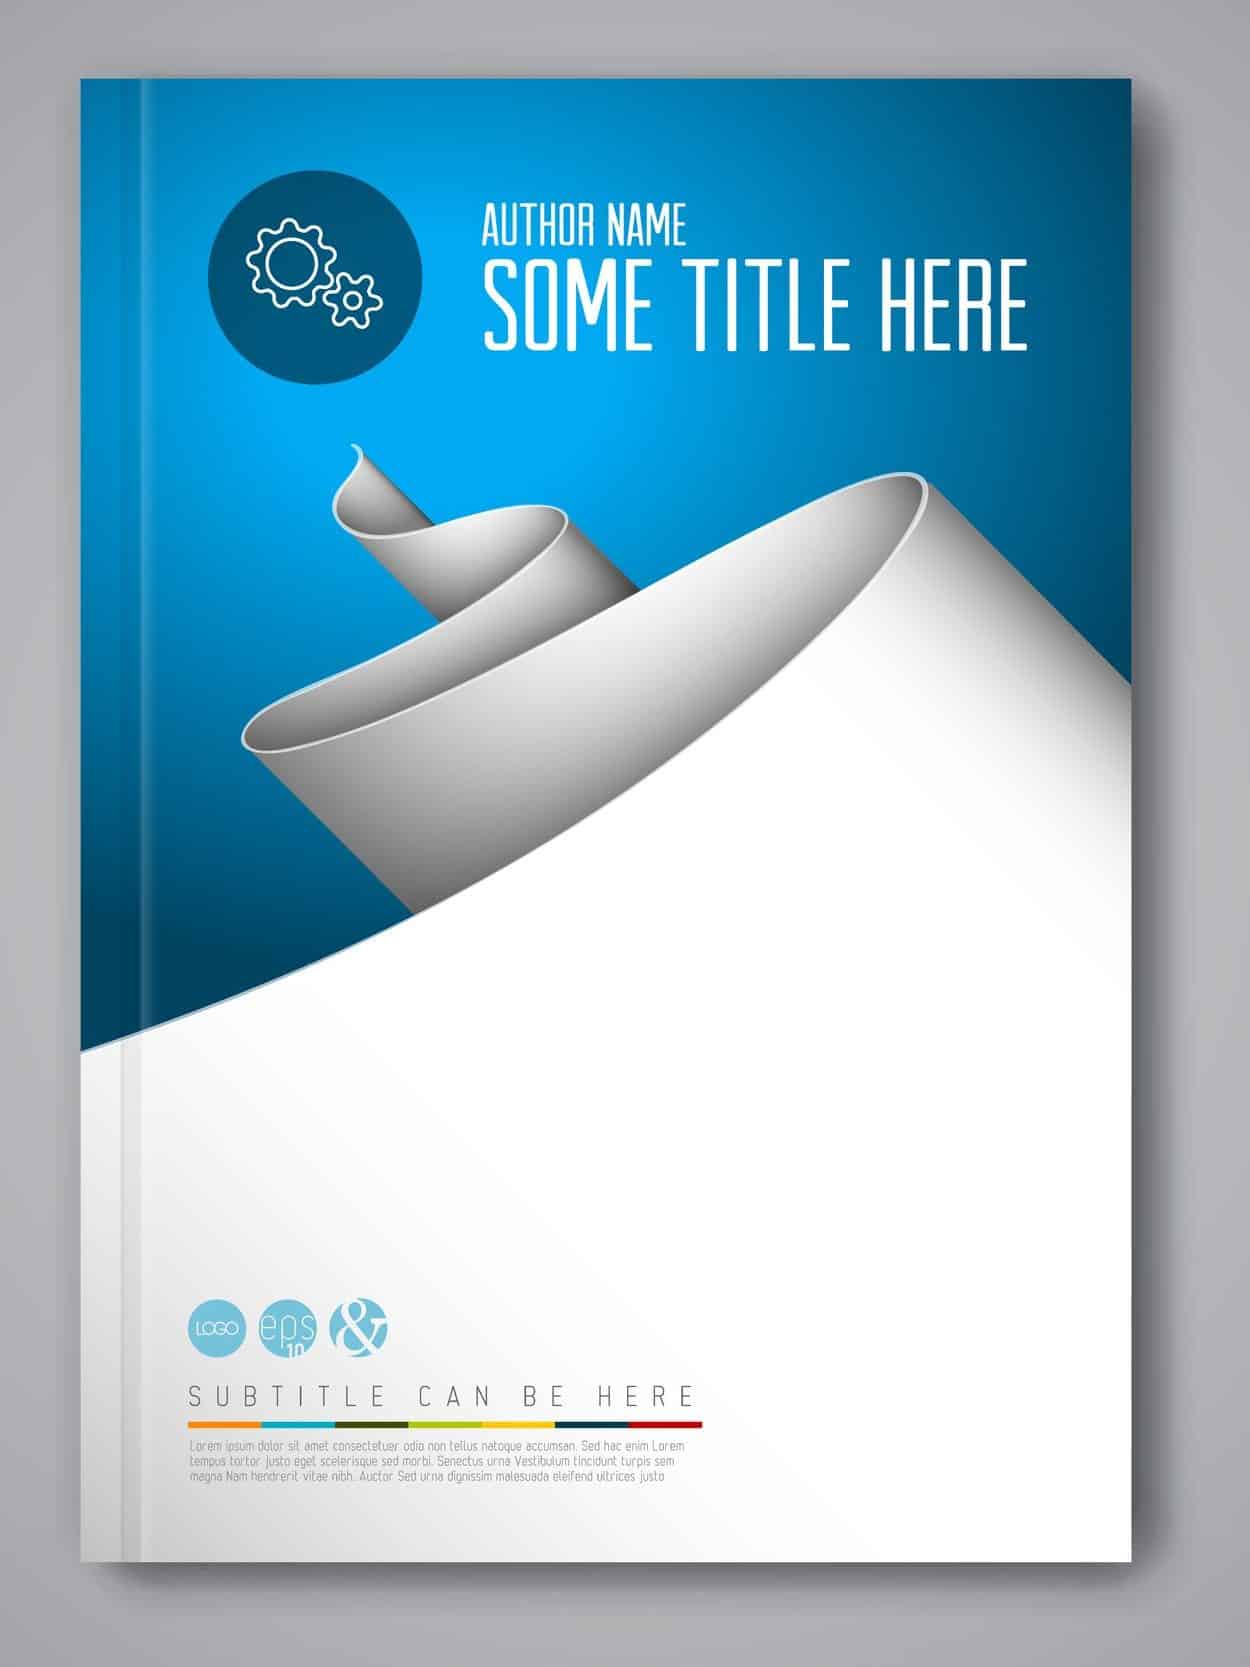 Modern Vector abstract brochure / book / flyer design template with paper